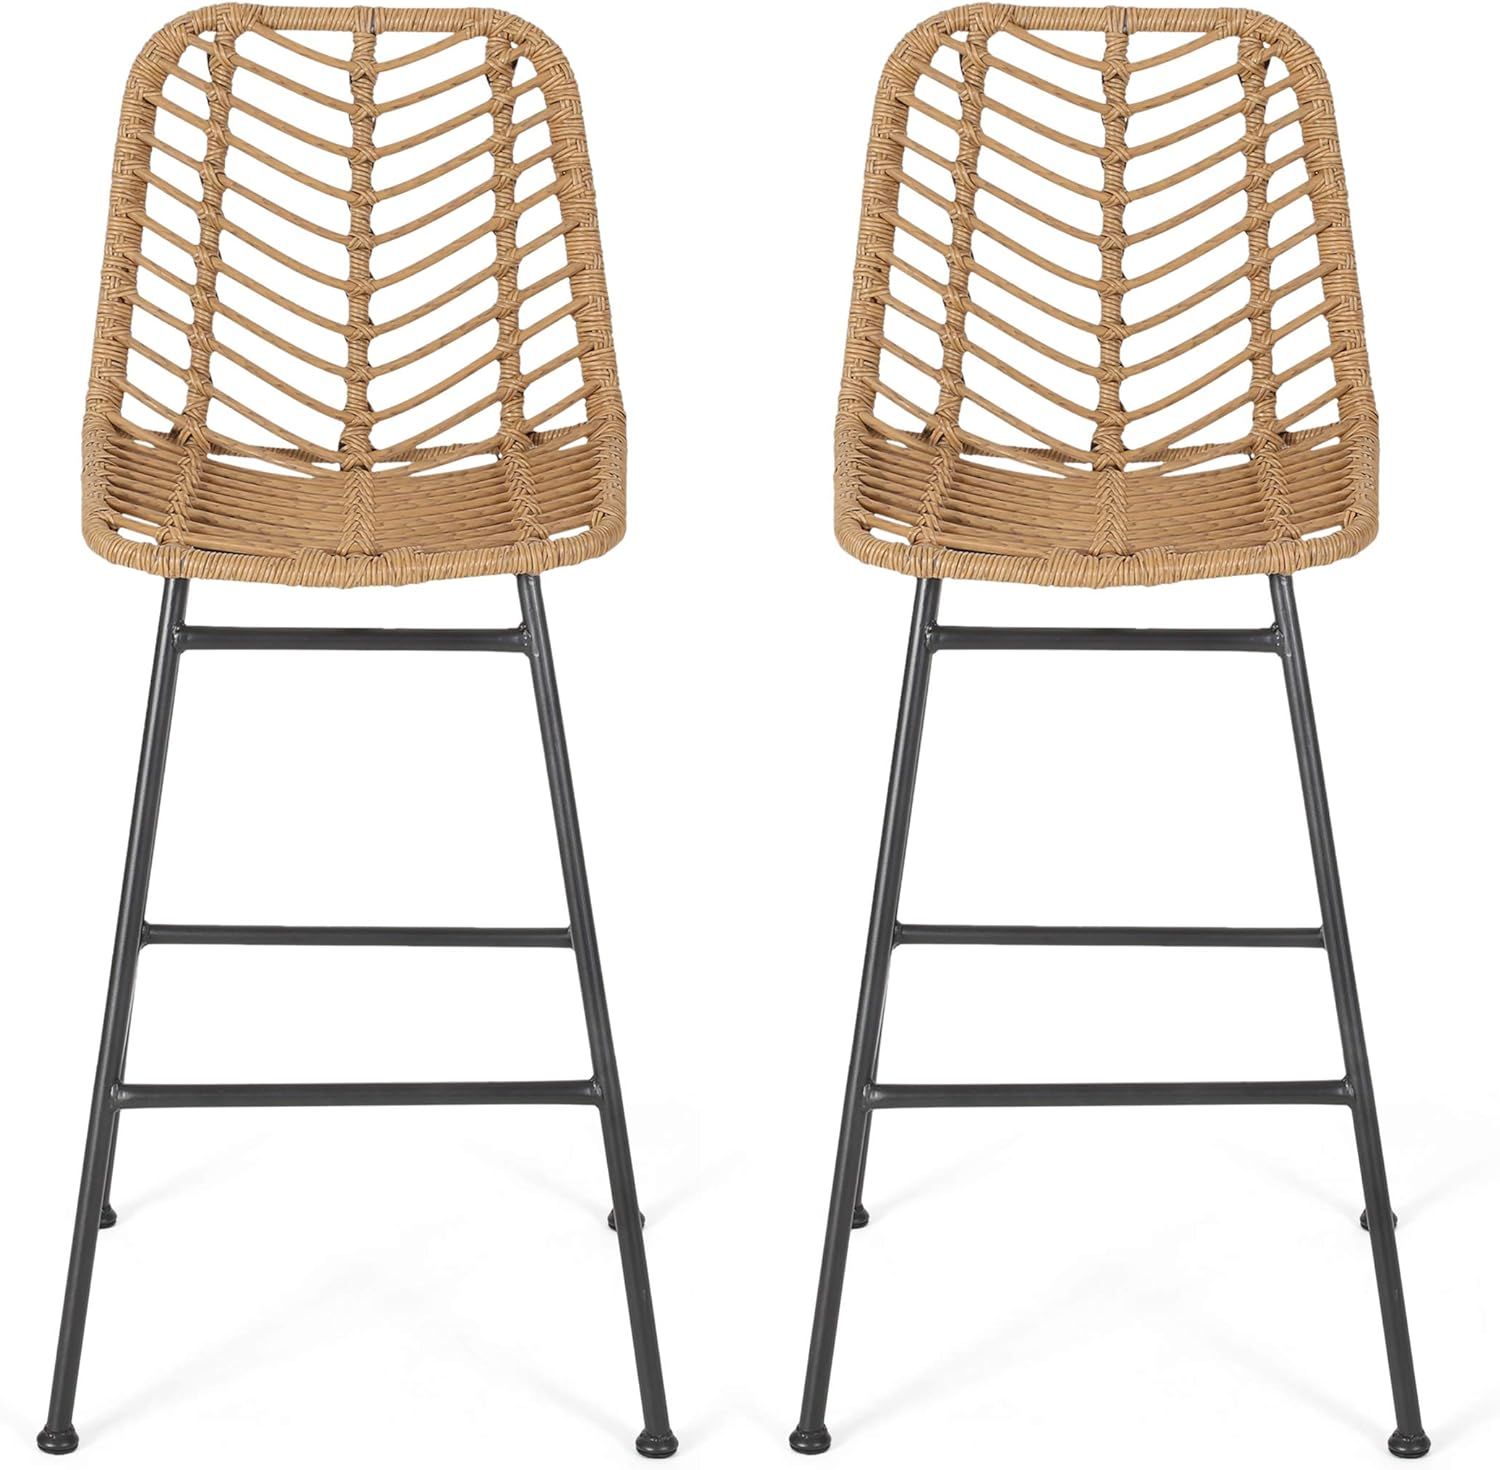 Jessie Outdoor Wicker Barstools (Set of 2), Light Brown and Black | Amazon (US)